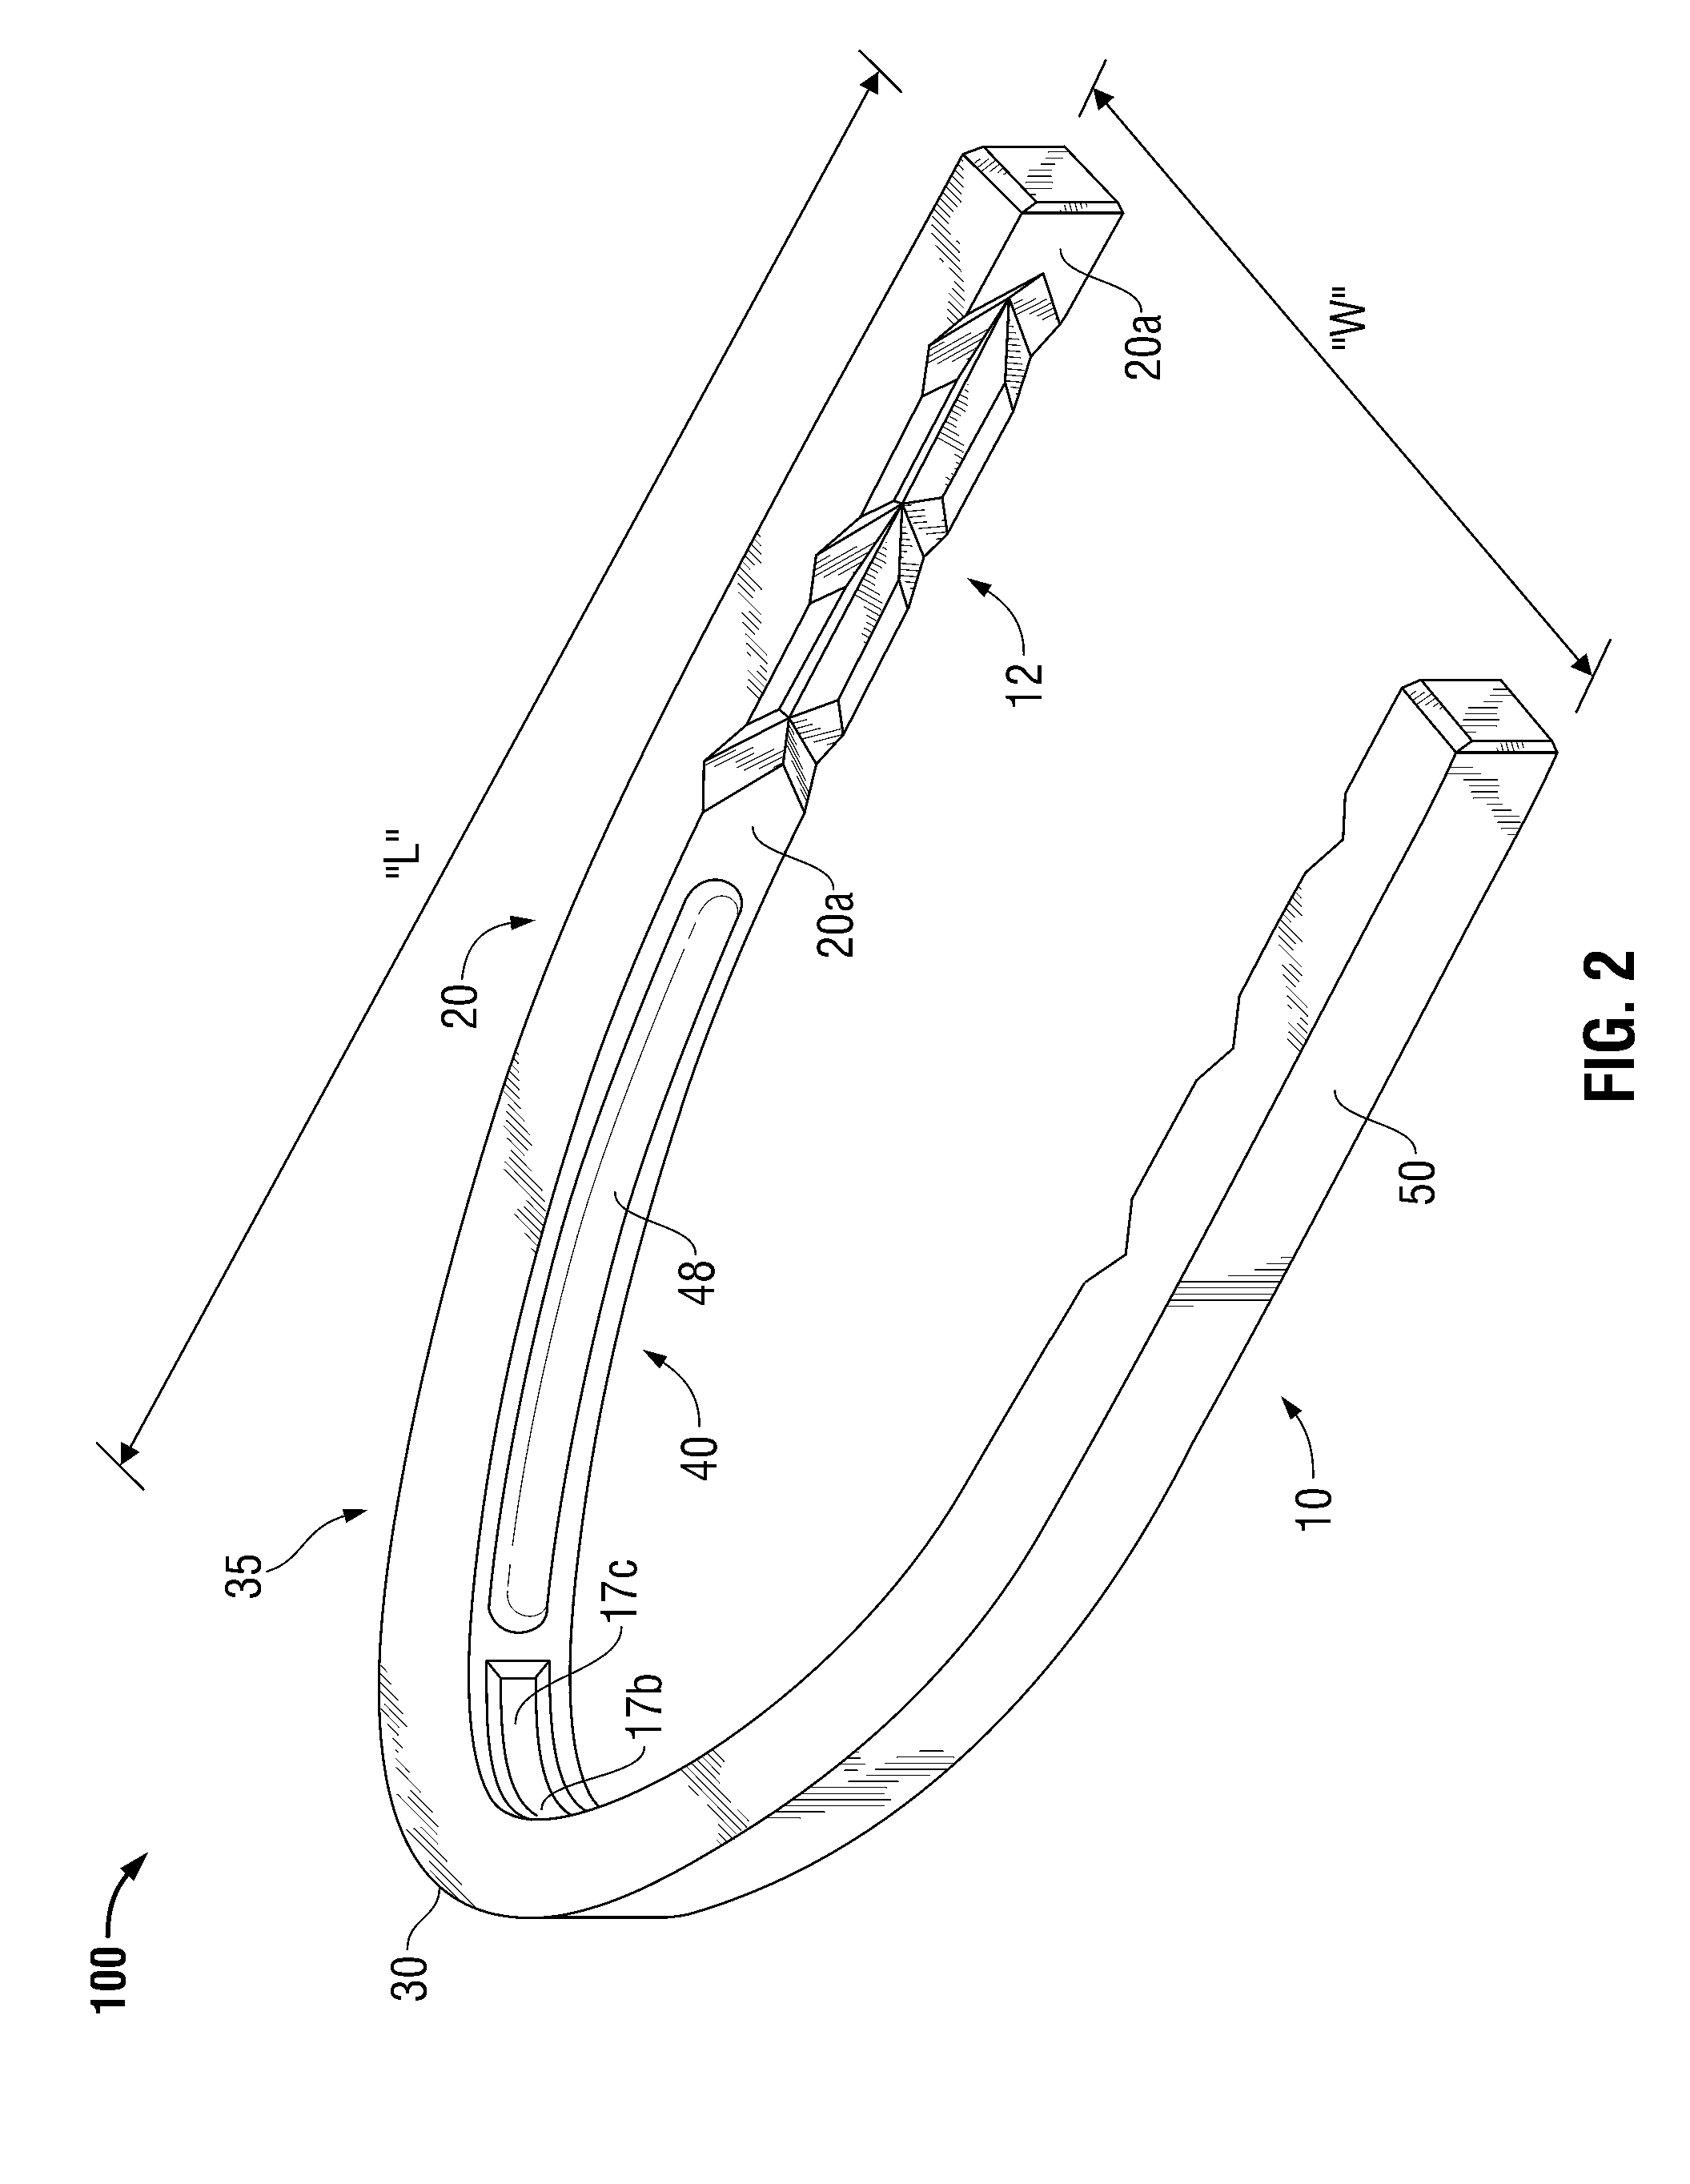 Surgical hemostatic clip including work-hardened, movement-inhibiting structure and method of manufacturing same